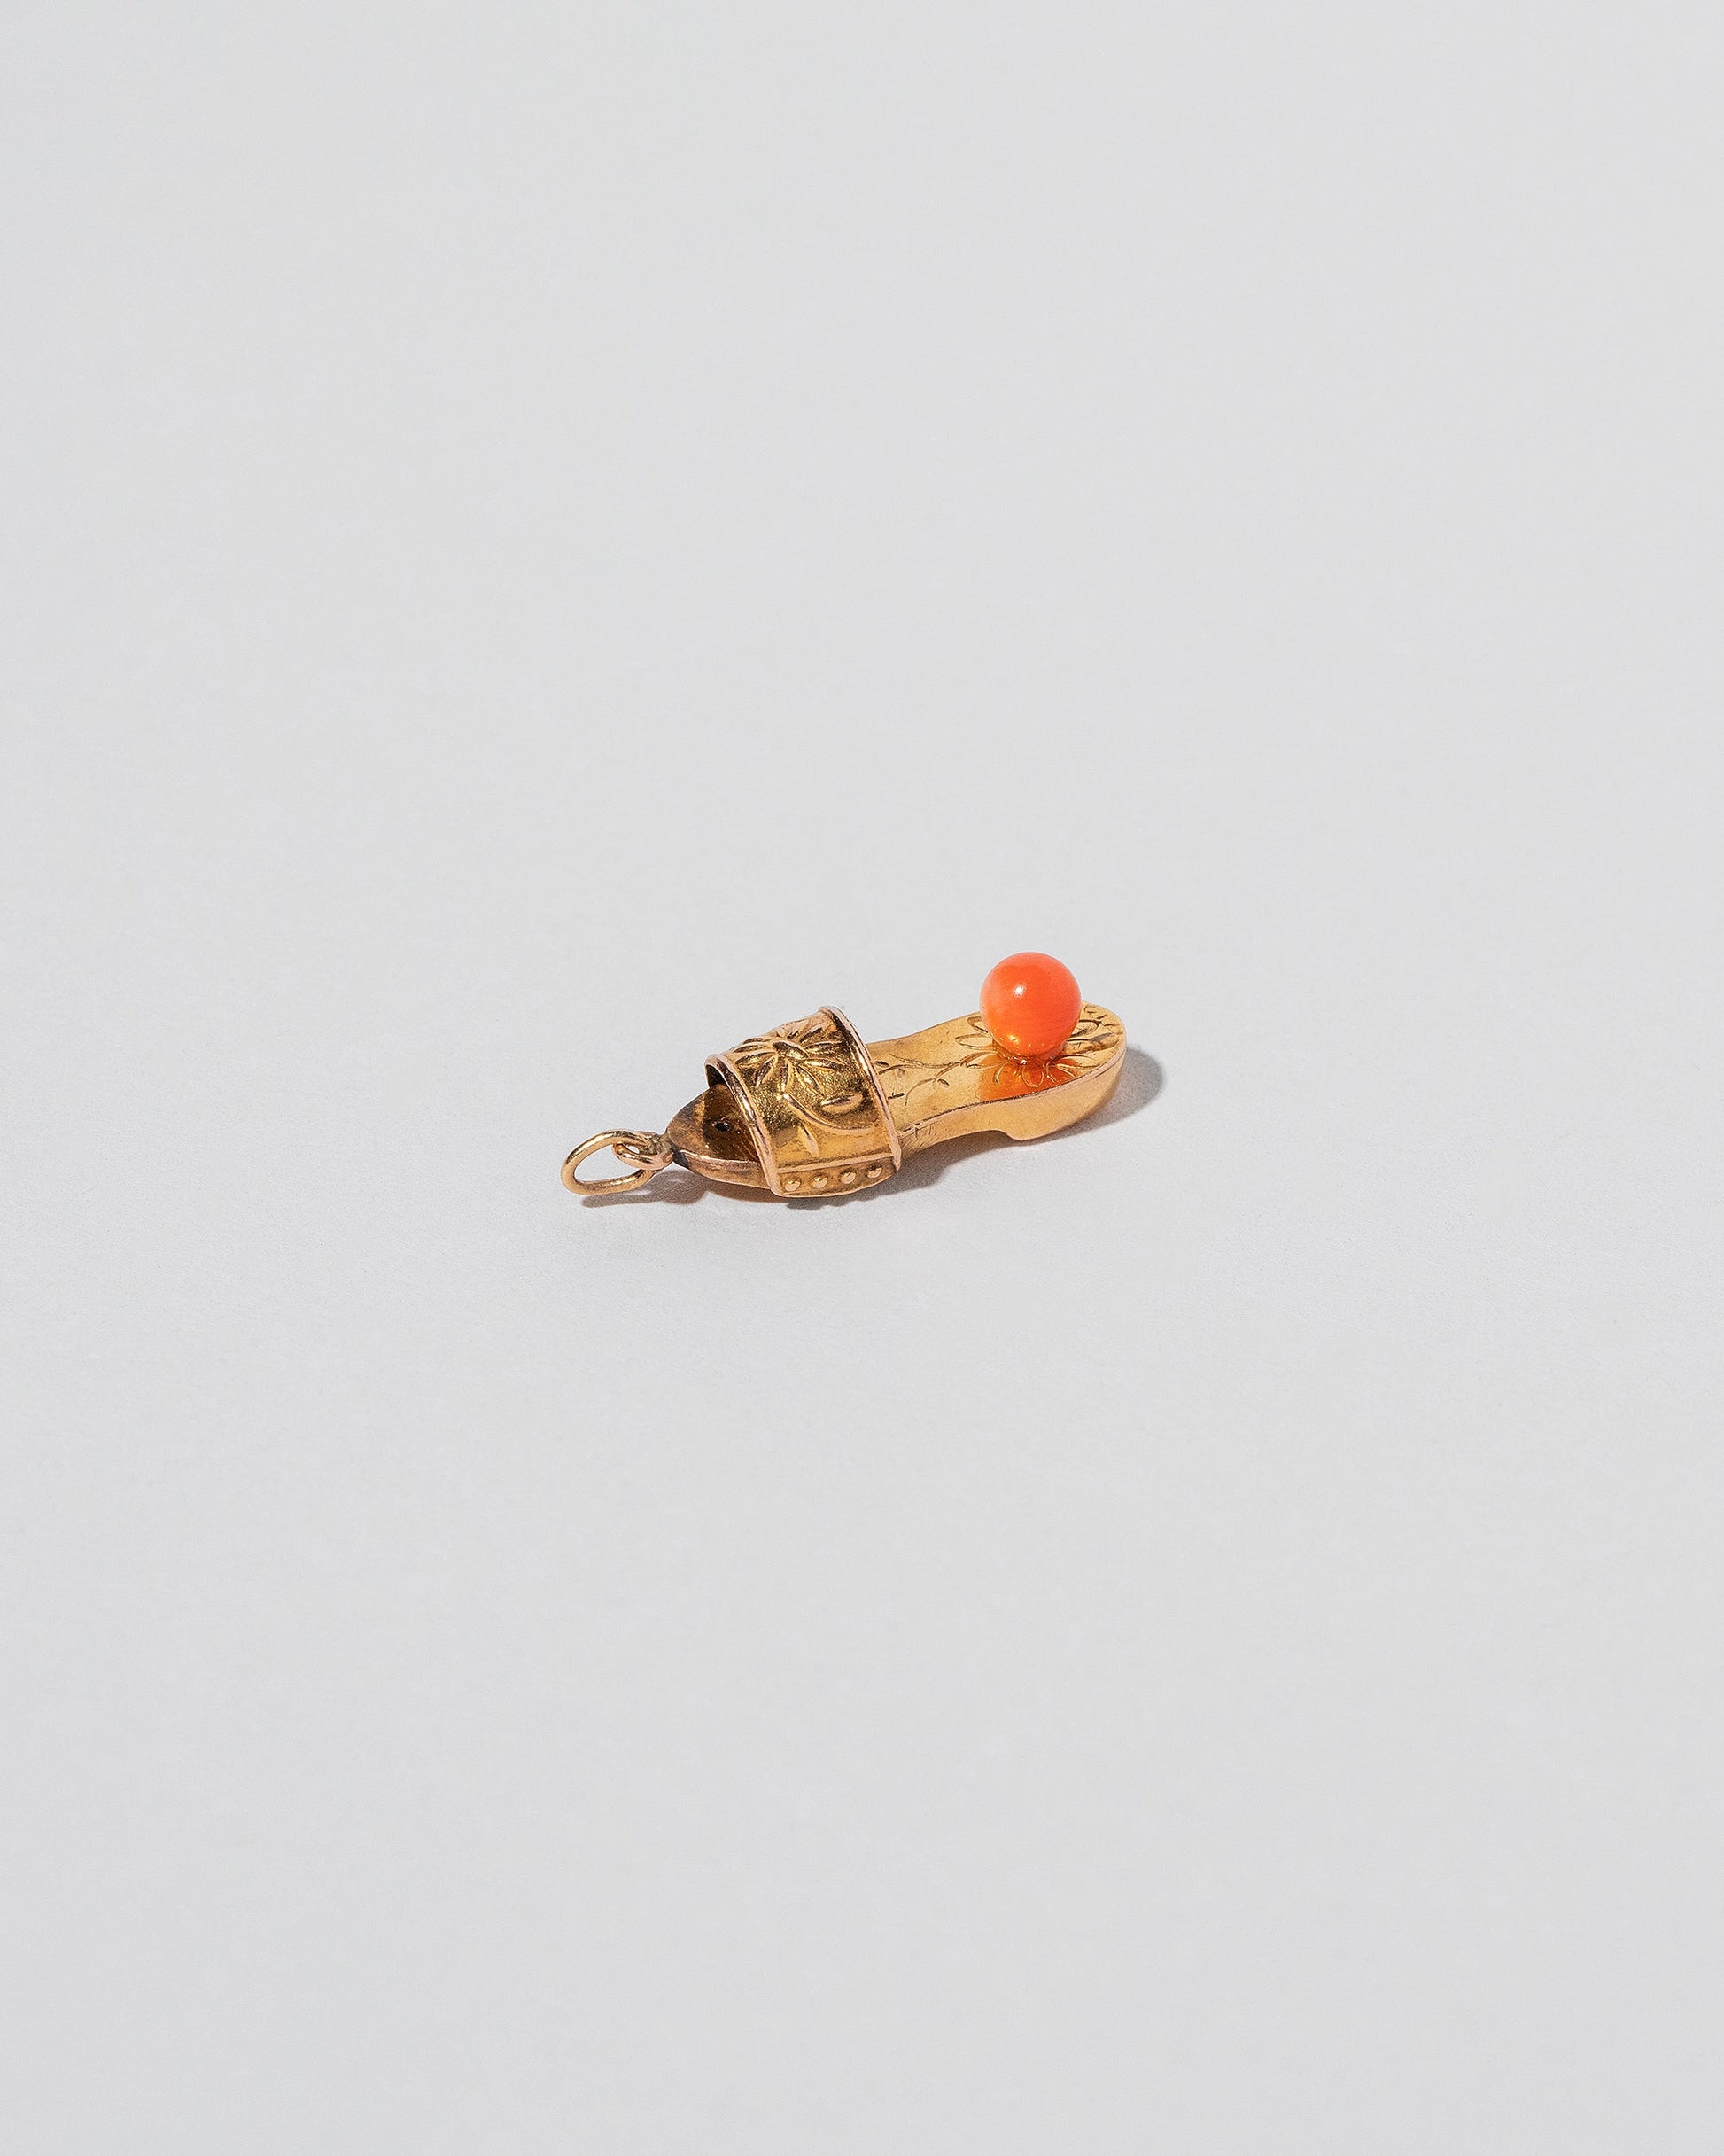  Coral Slipper Charm on light color background.